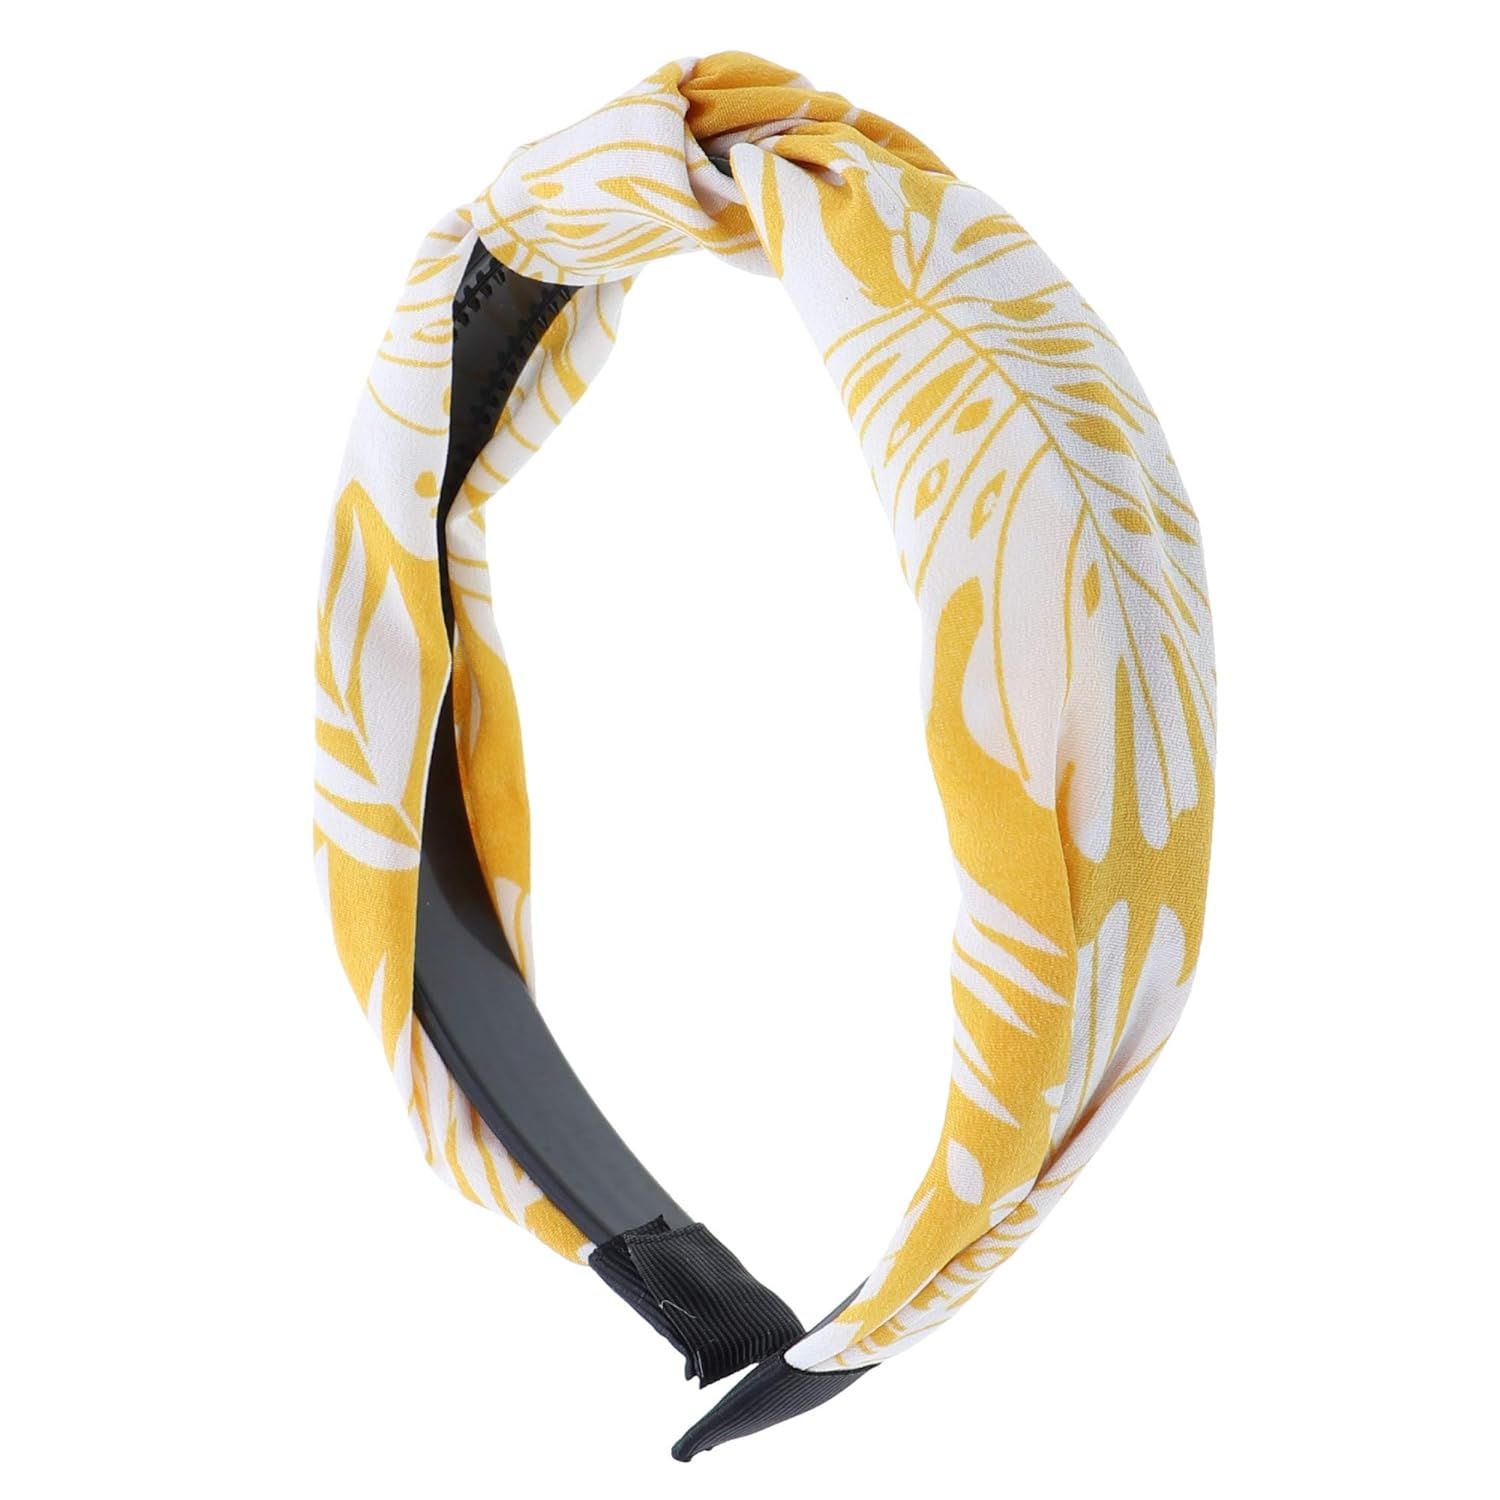 Turban Knot Headband with Leaves for Women and Girls-Yellow | Amazon (US)